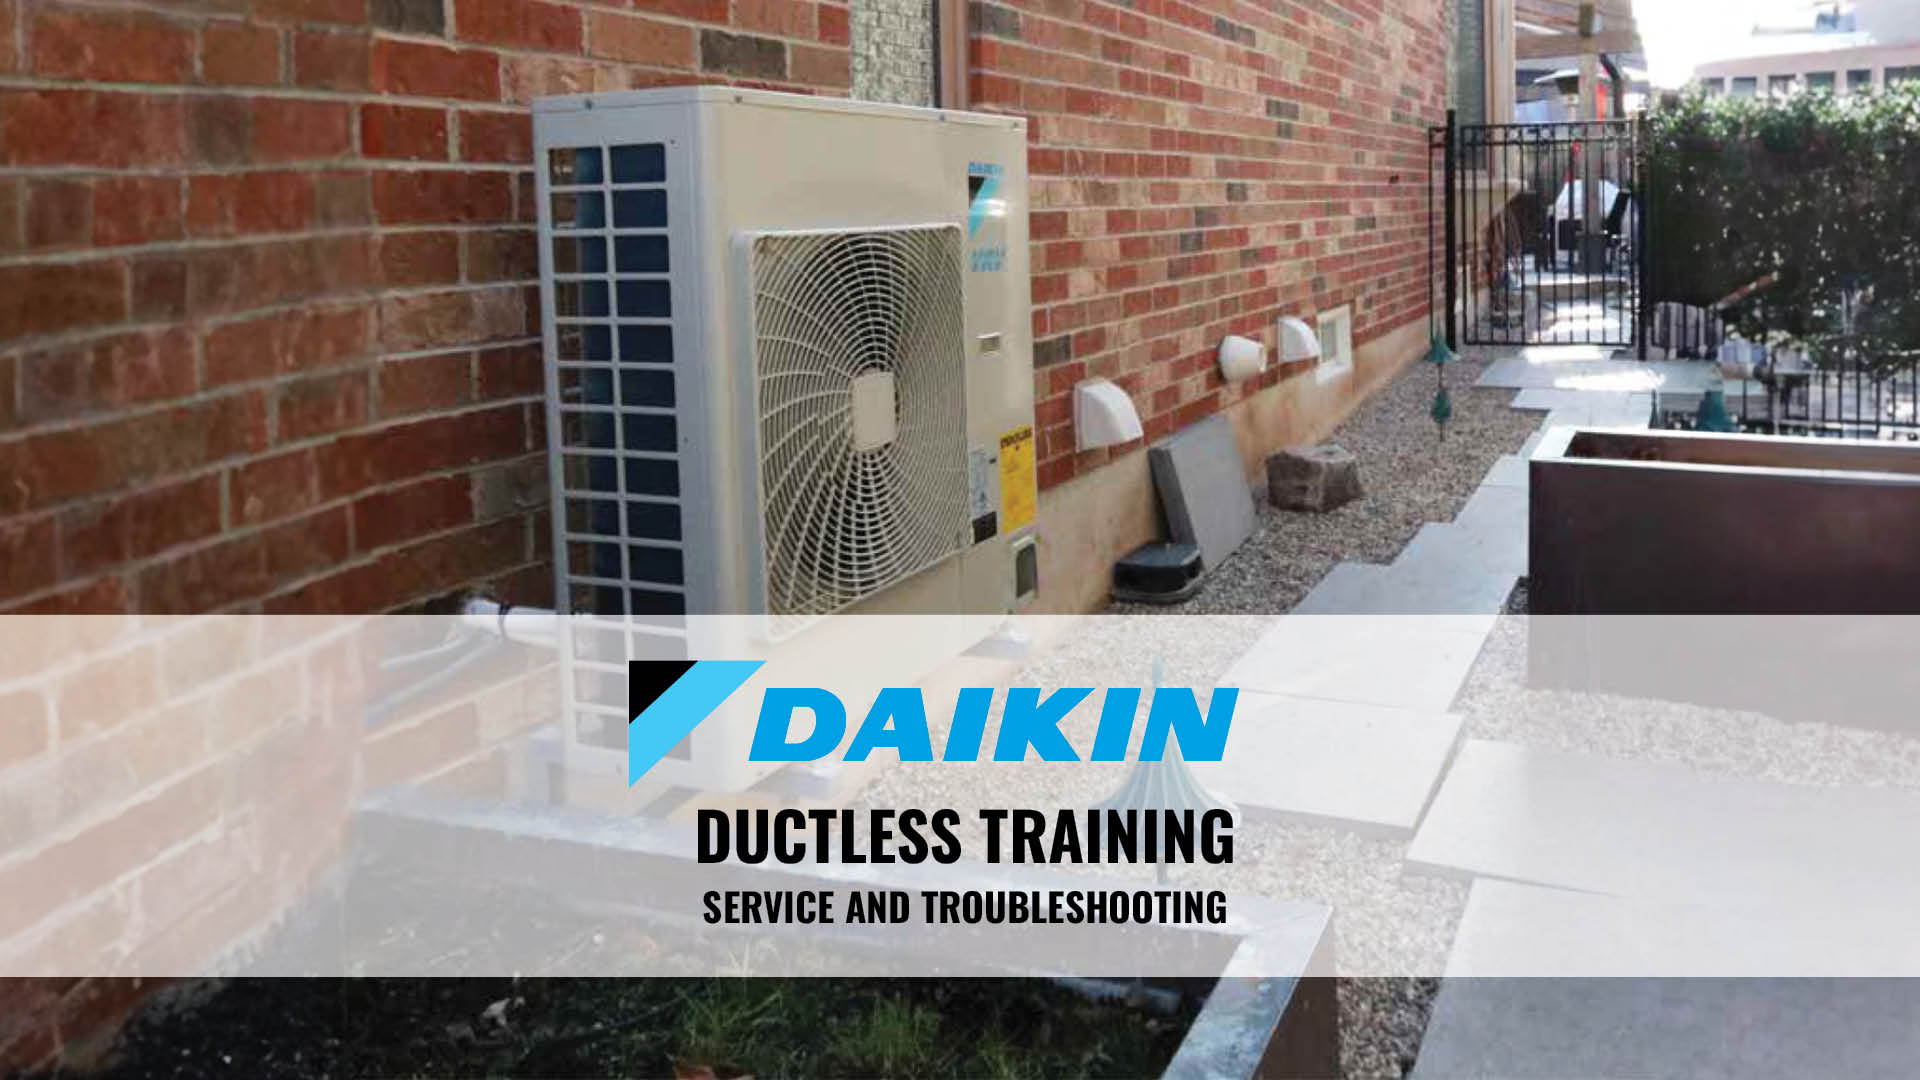 Daikin Ductless Training: Service and Troubleshooting in North Calgary